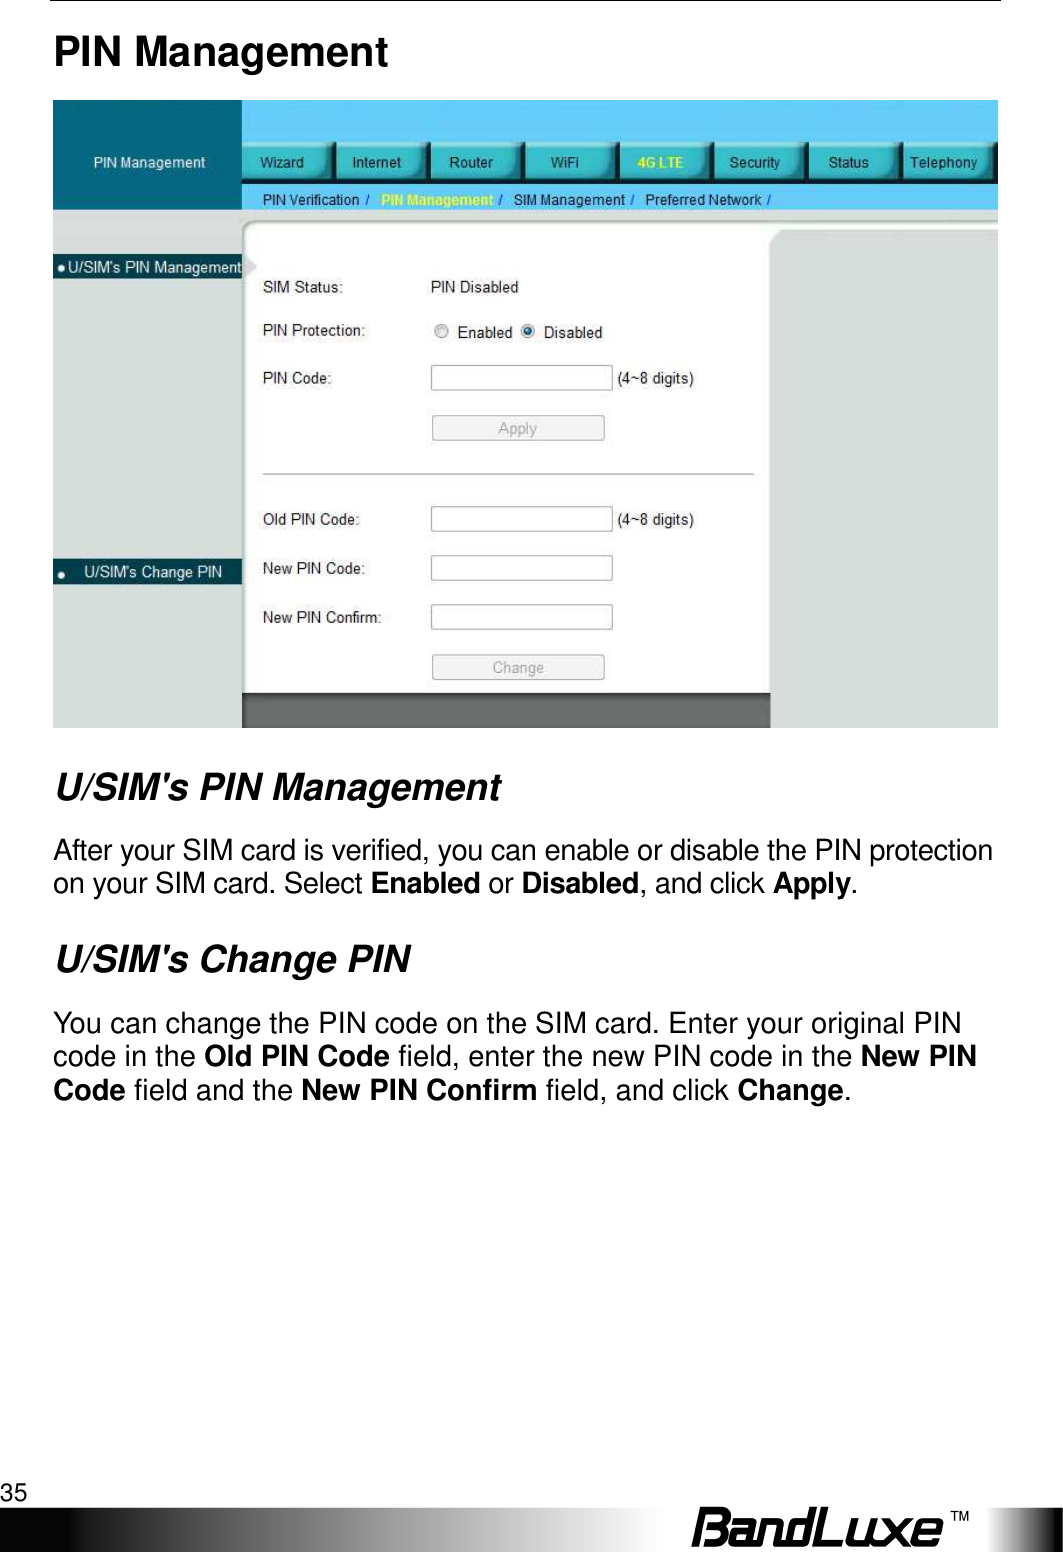   4G LTE Setup 35 PIN Management  U/SIM&apos;s PIN Management After your SIM card is verified, you can enable or disable the PIN protection on your SIM card. Select Enabled or Disabled, and click Apply. U/SIM&apos;s Change PIN You can change the PIN code on the SIM card. Enter your original PIN code in the Old PIN Code field, enter the new PIN code in the New PIN Code field and the New PIN Confirm field, and click Change. 